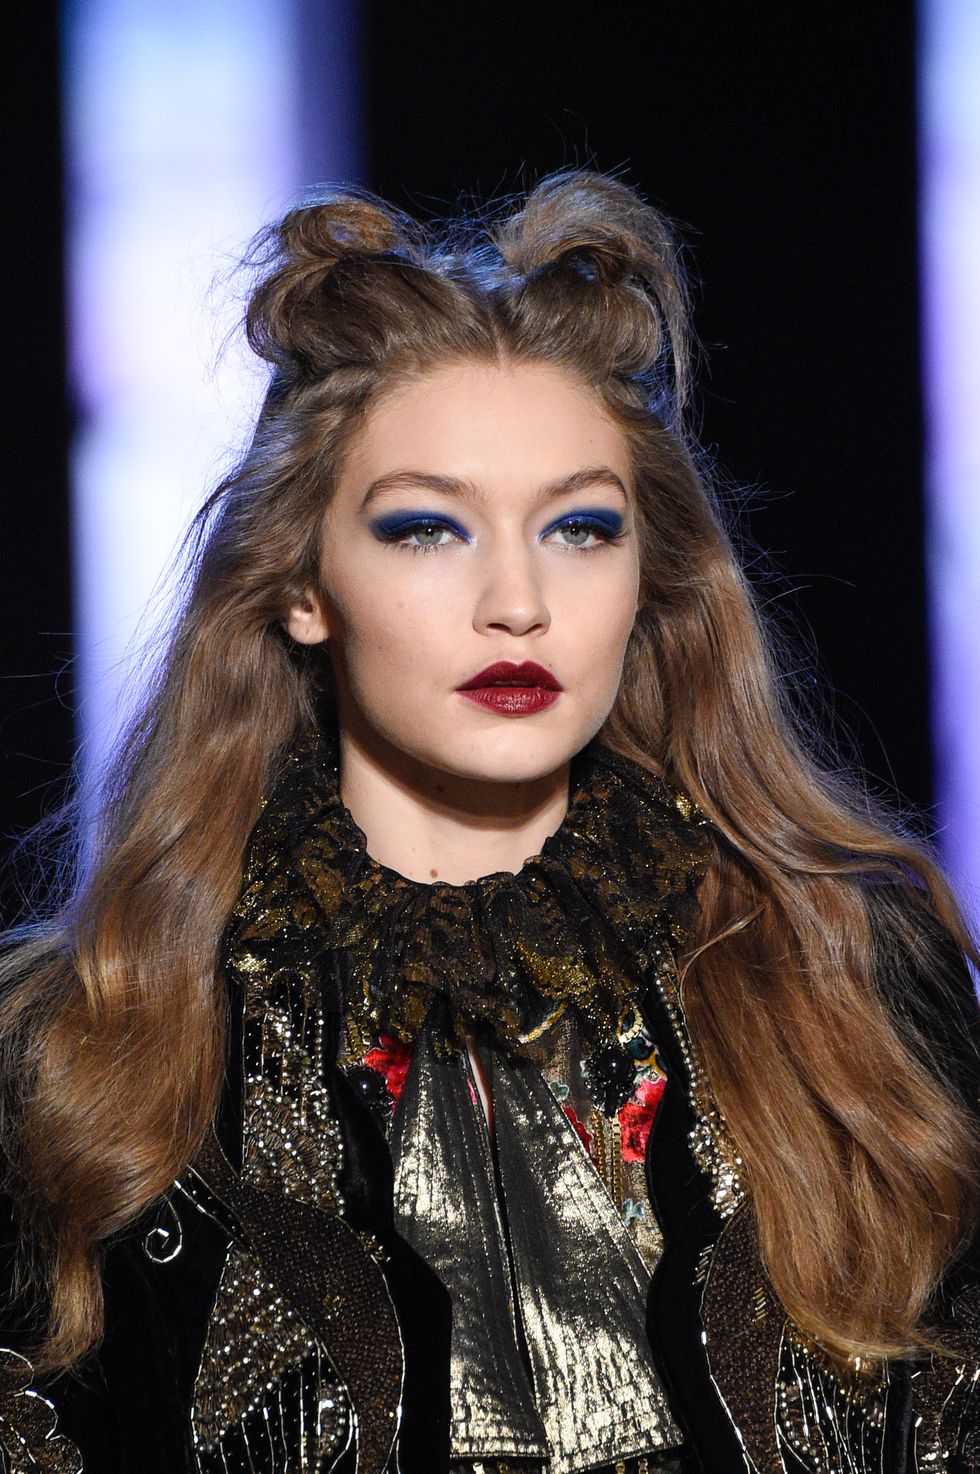 NEW YORK, NY - FEBRUARY 15:  Gigi Hadid, beauty detail, walks the runway for the Anna Sui collection during New York Fashion Week: The Shows at Gallery 1, Skylight Clarkson Sq on February 15, 2017 in New York City.  (Photo by Peter White/WireImage)